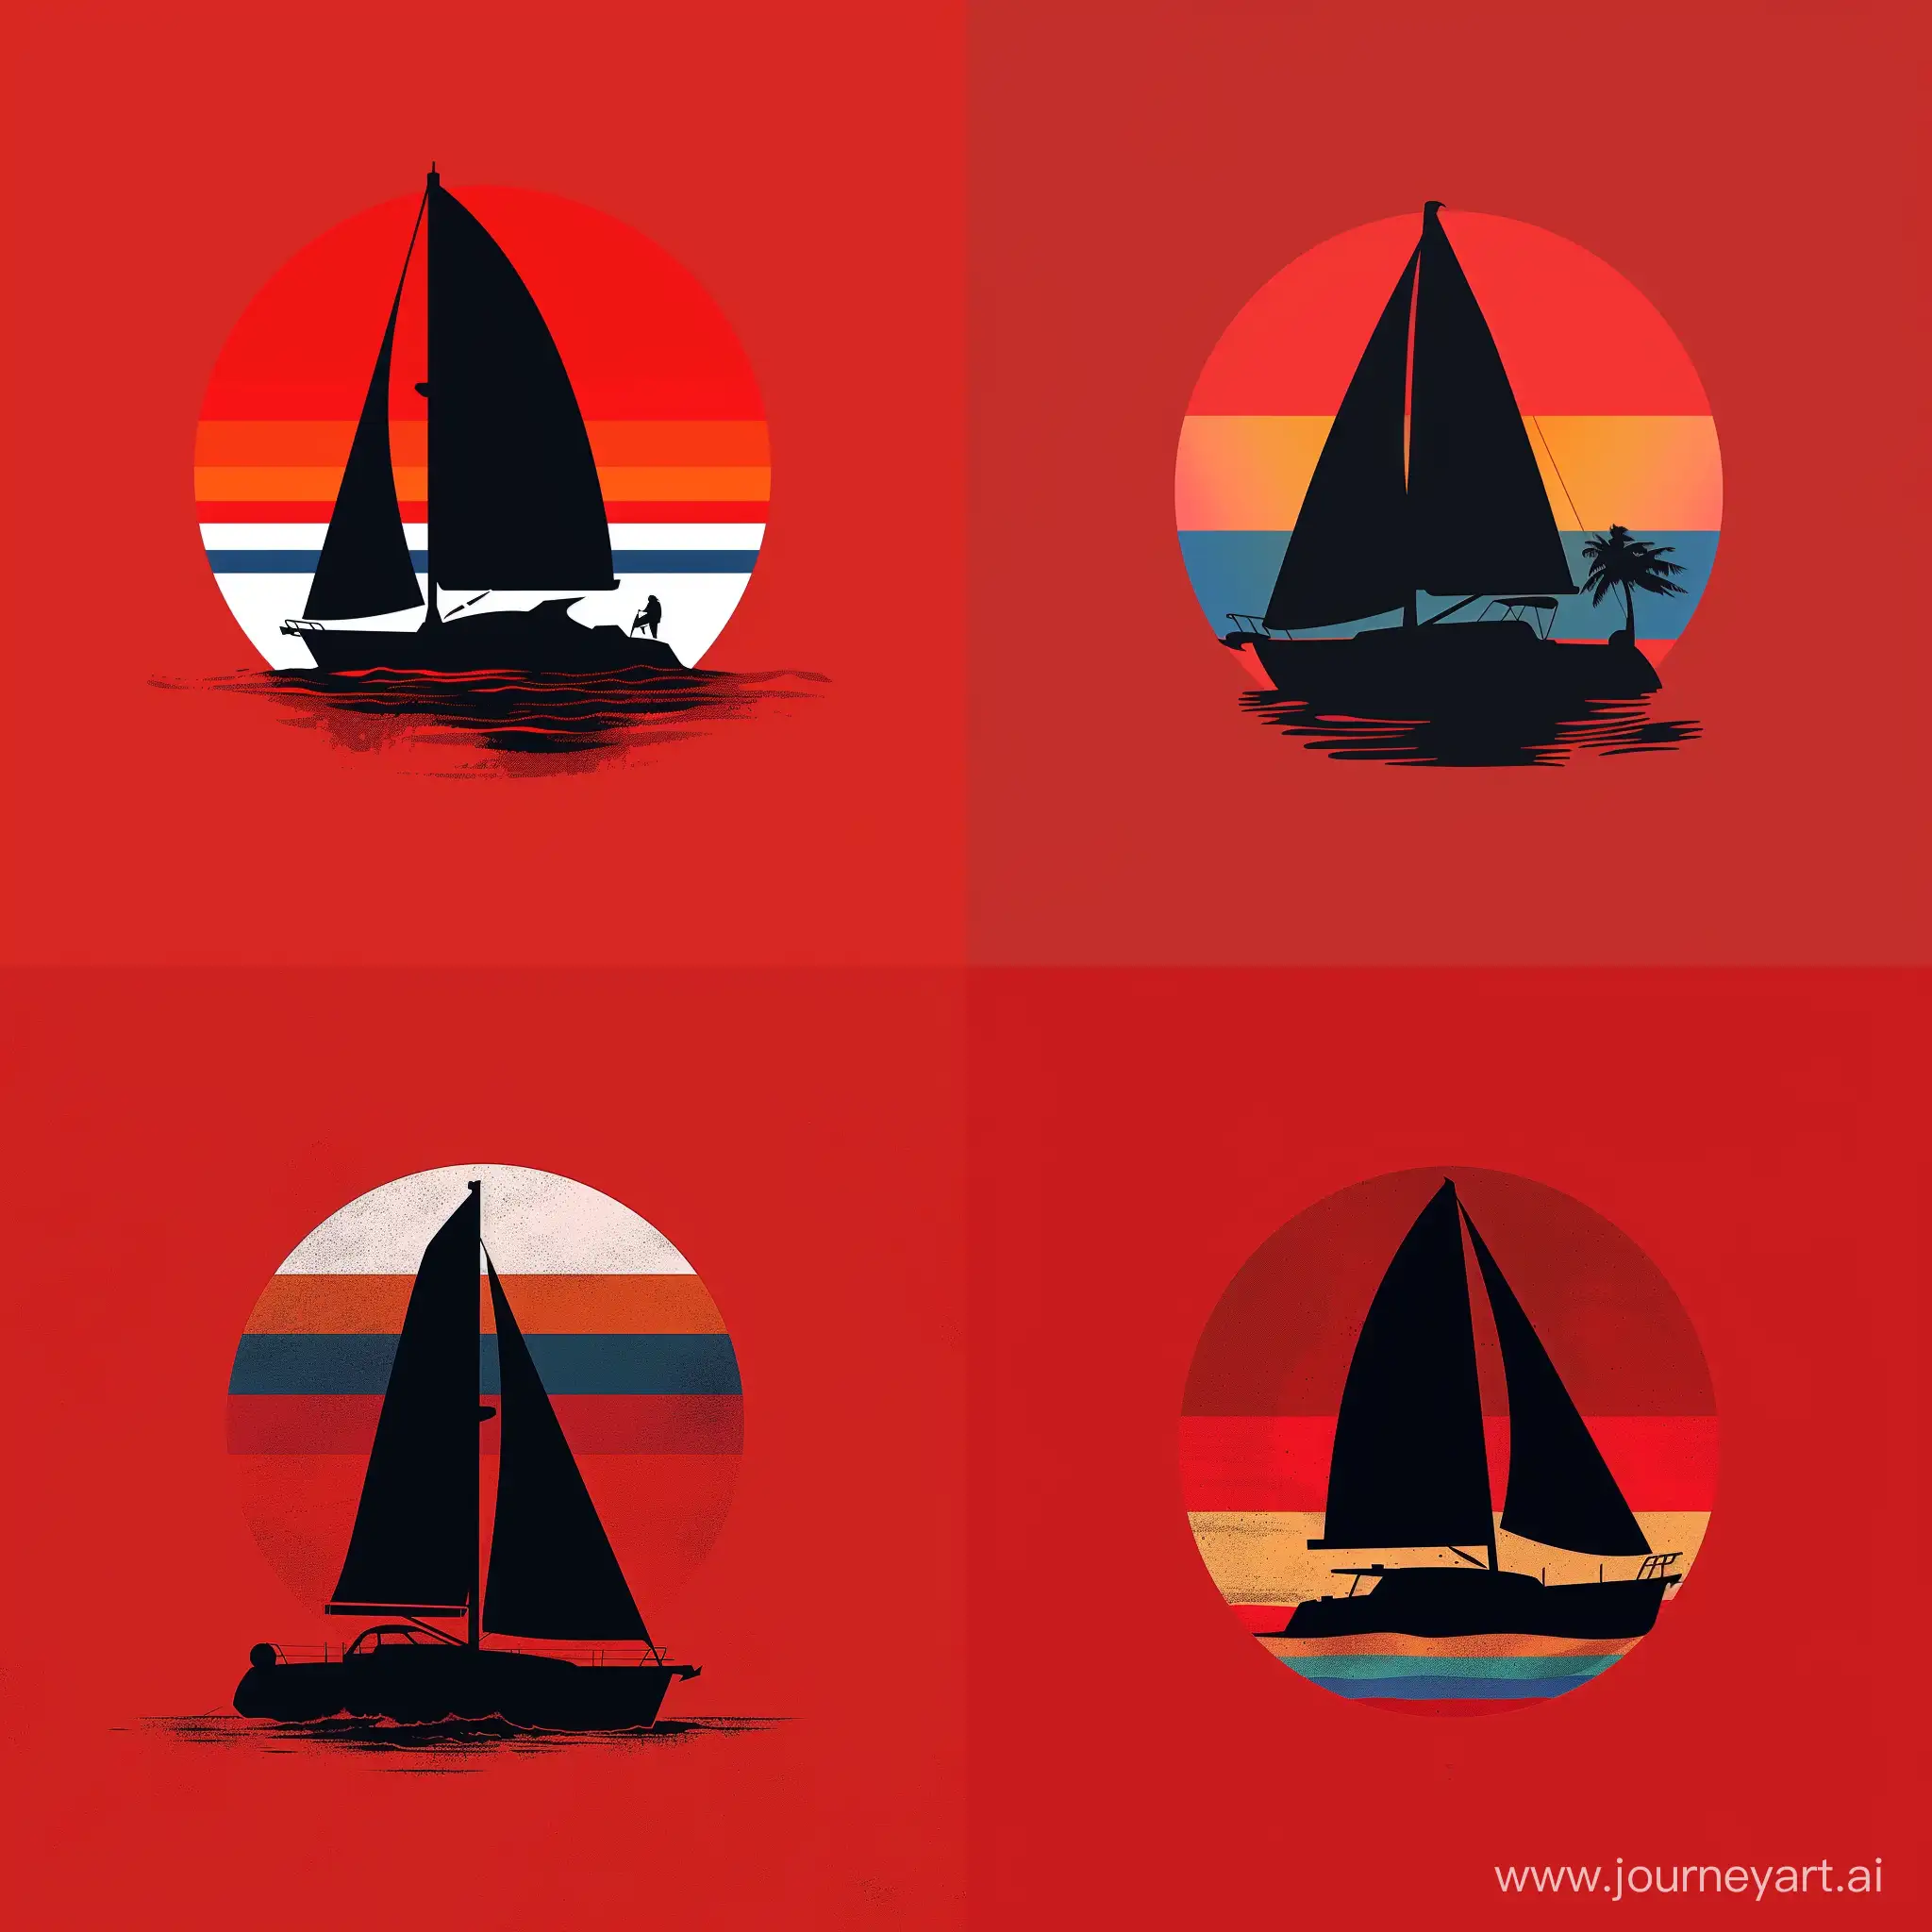 Blend of a red sunset and sailboat logo that has sail filled with a rainbow pattern consisting of six horizontal stripes sailboat. https://cdn.discordapp.com/attachments/1187305629551972372/1205806620505018368/images_5_1_1.png?ex=65d9b5ed&is=65c740ed&hm=db931d5695c60f80d277232efcfe69bdc6b8fc17f68bf84e46b69b5fb2c7e654& https://cdn.discordapp.com/attachments/1187305629551972372/1205963707029389352/ed3ebfba0eba52d9a85d3ff4b0e5aeaf.jpg?ex=65da4839&is=65c7d339&hm=f6d45728fee653fe695c73964d1260da293565ef1872f158088791d6a4606595&